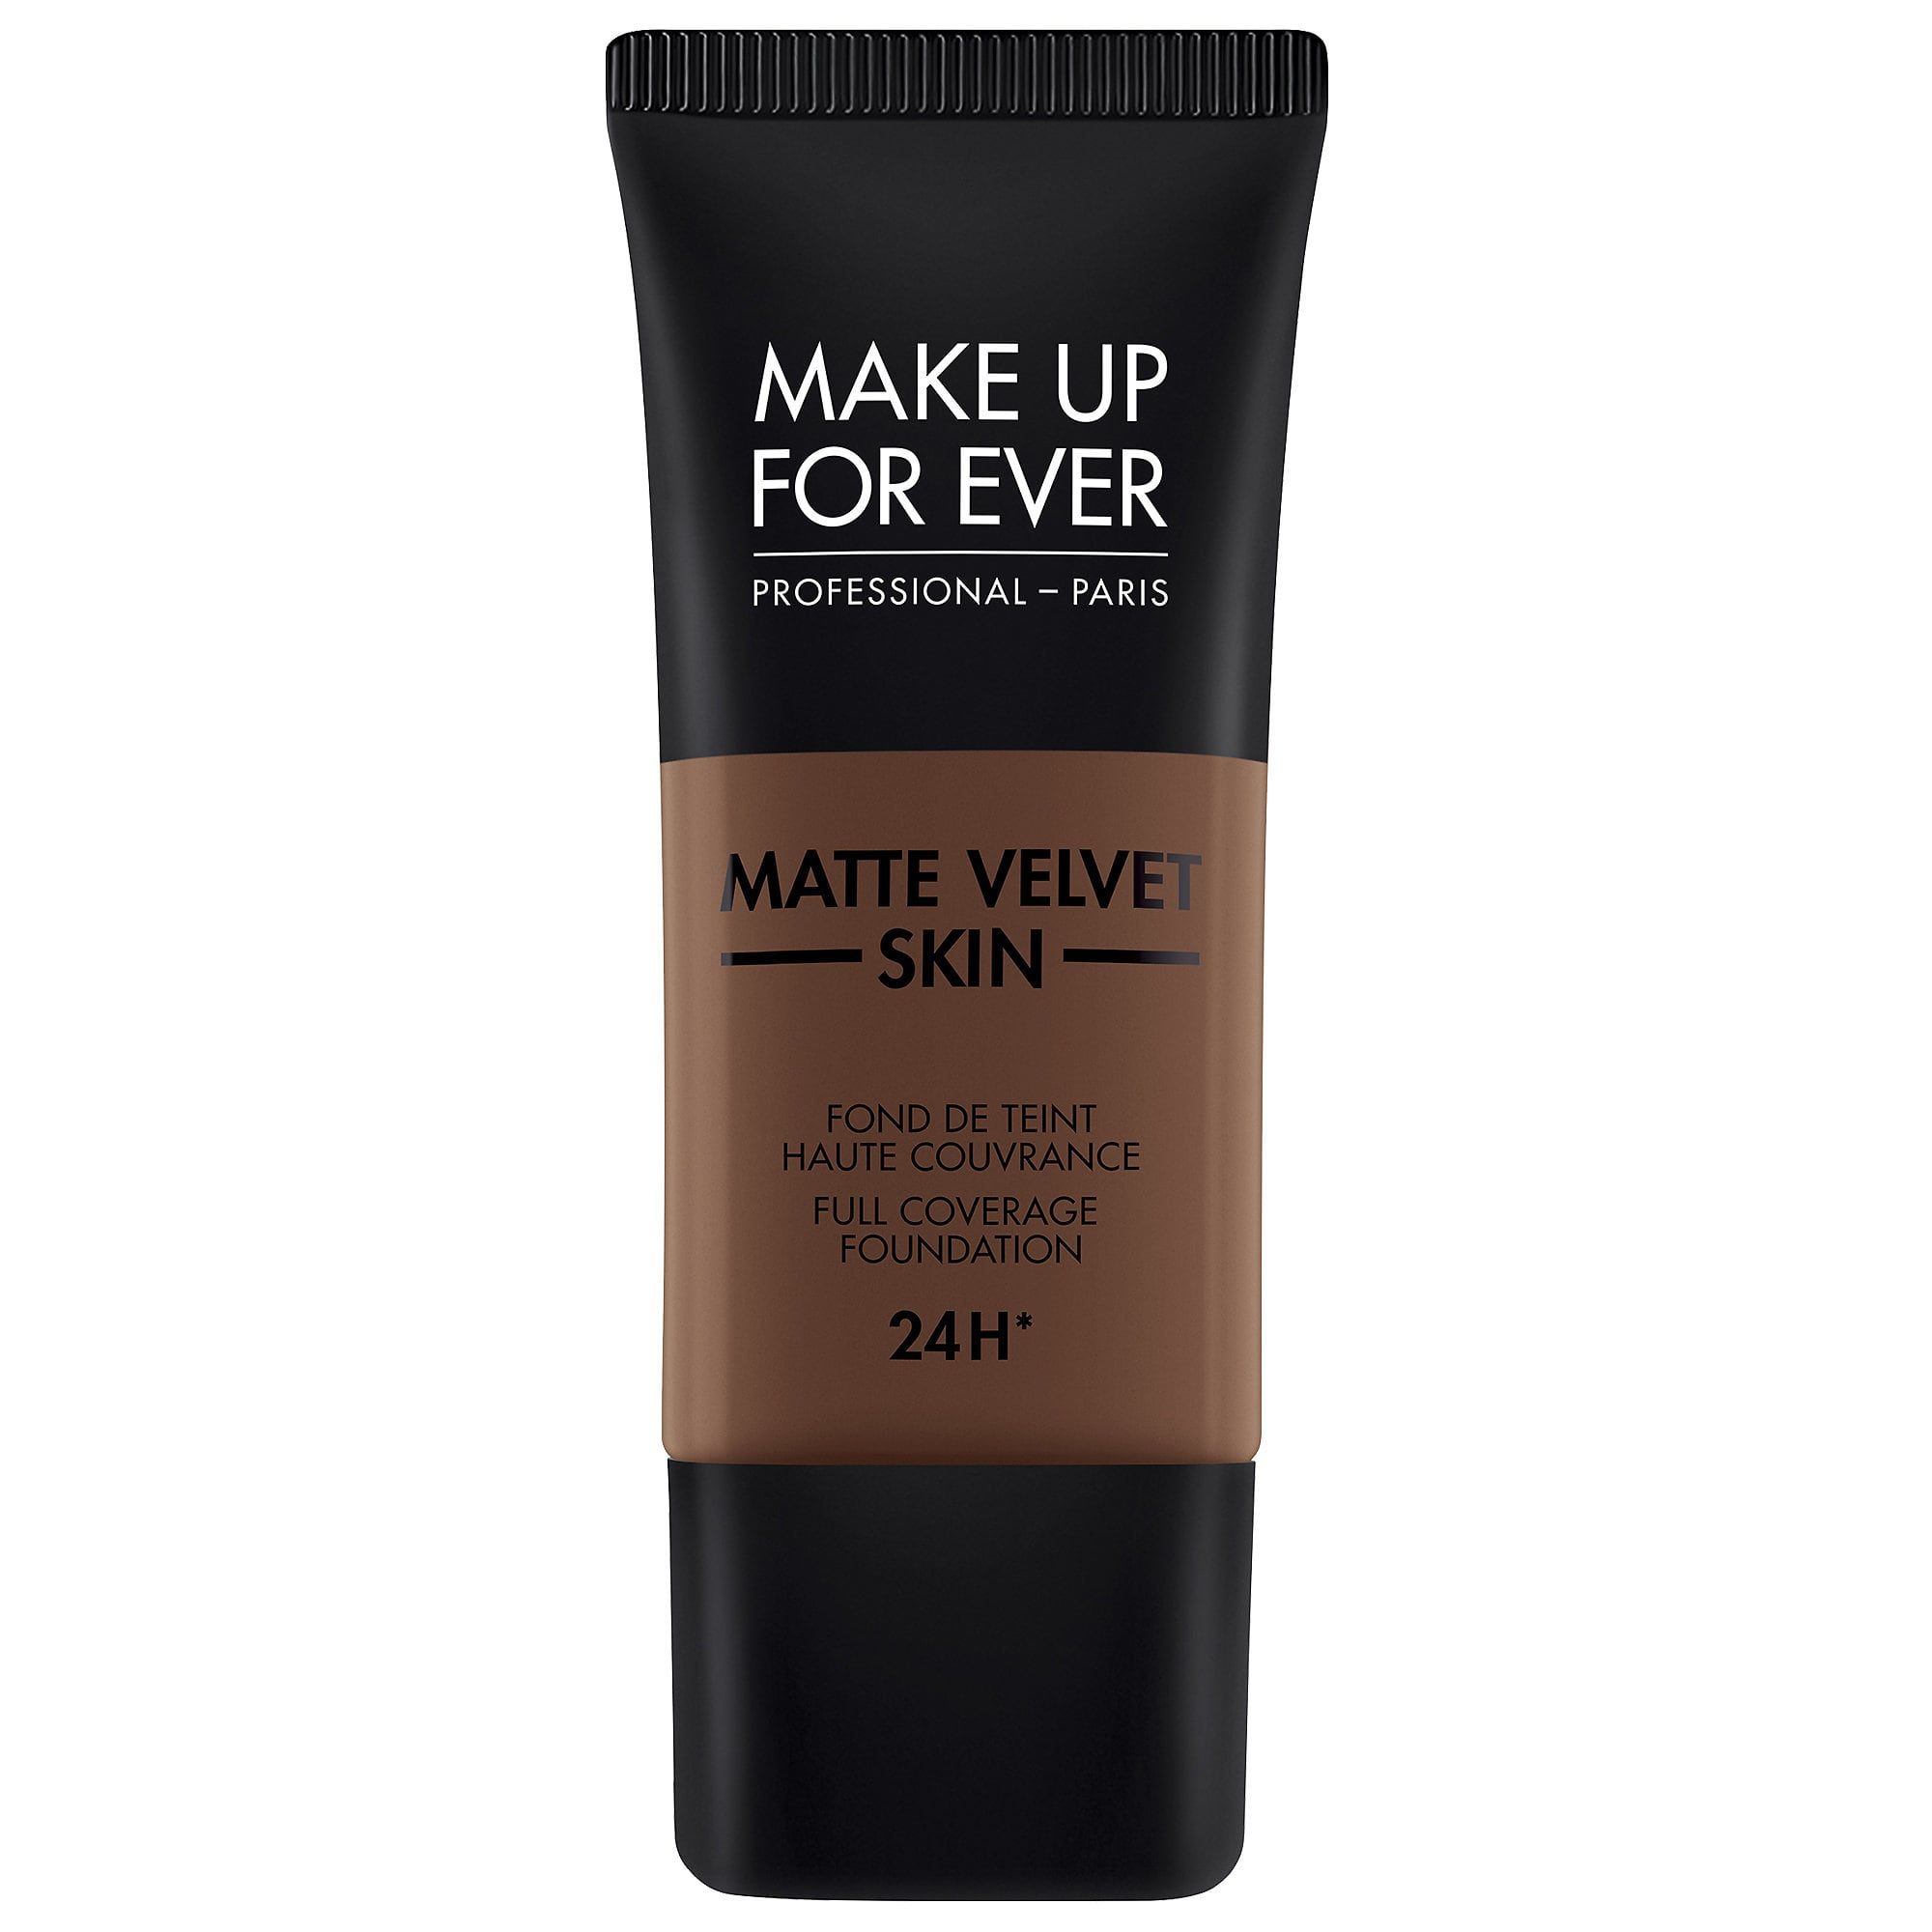 the best mac foundation for oily skin